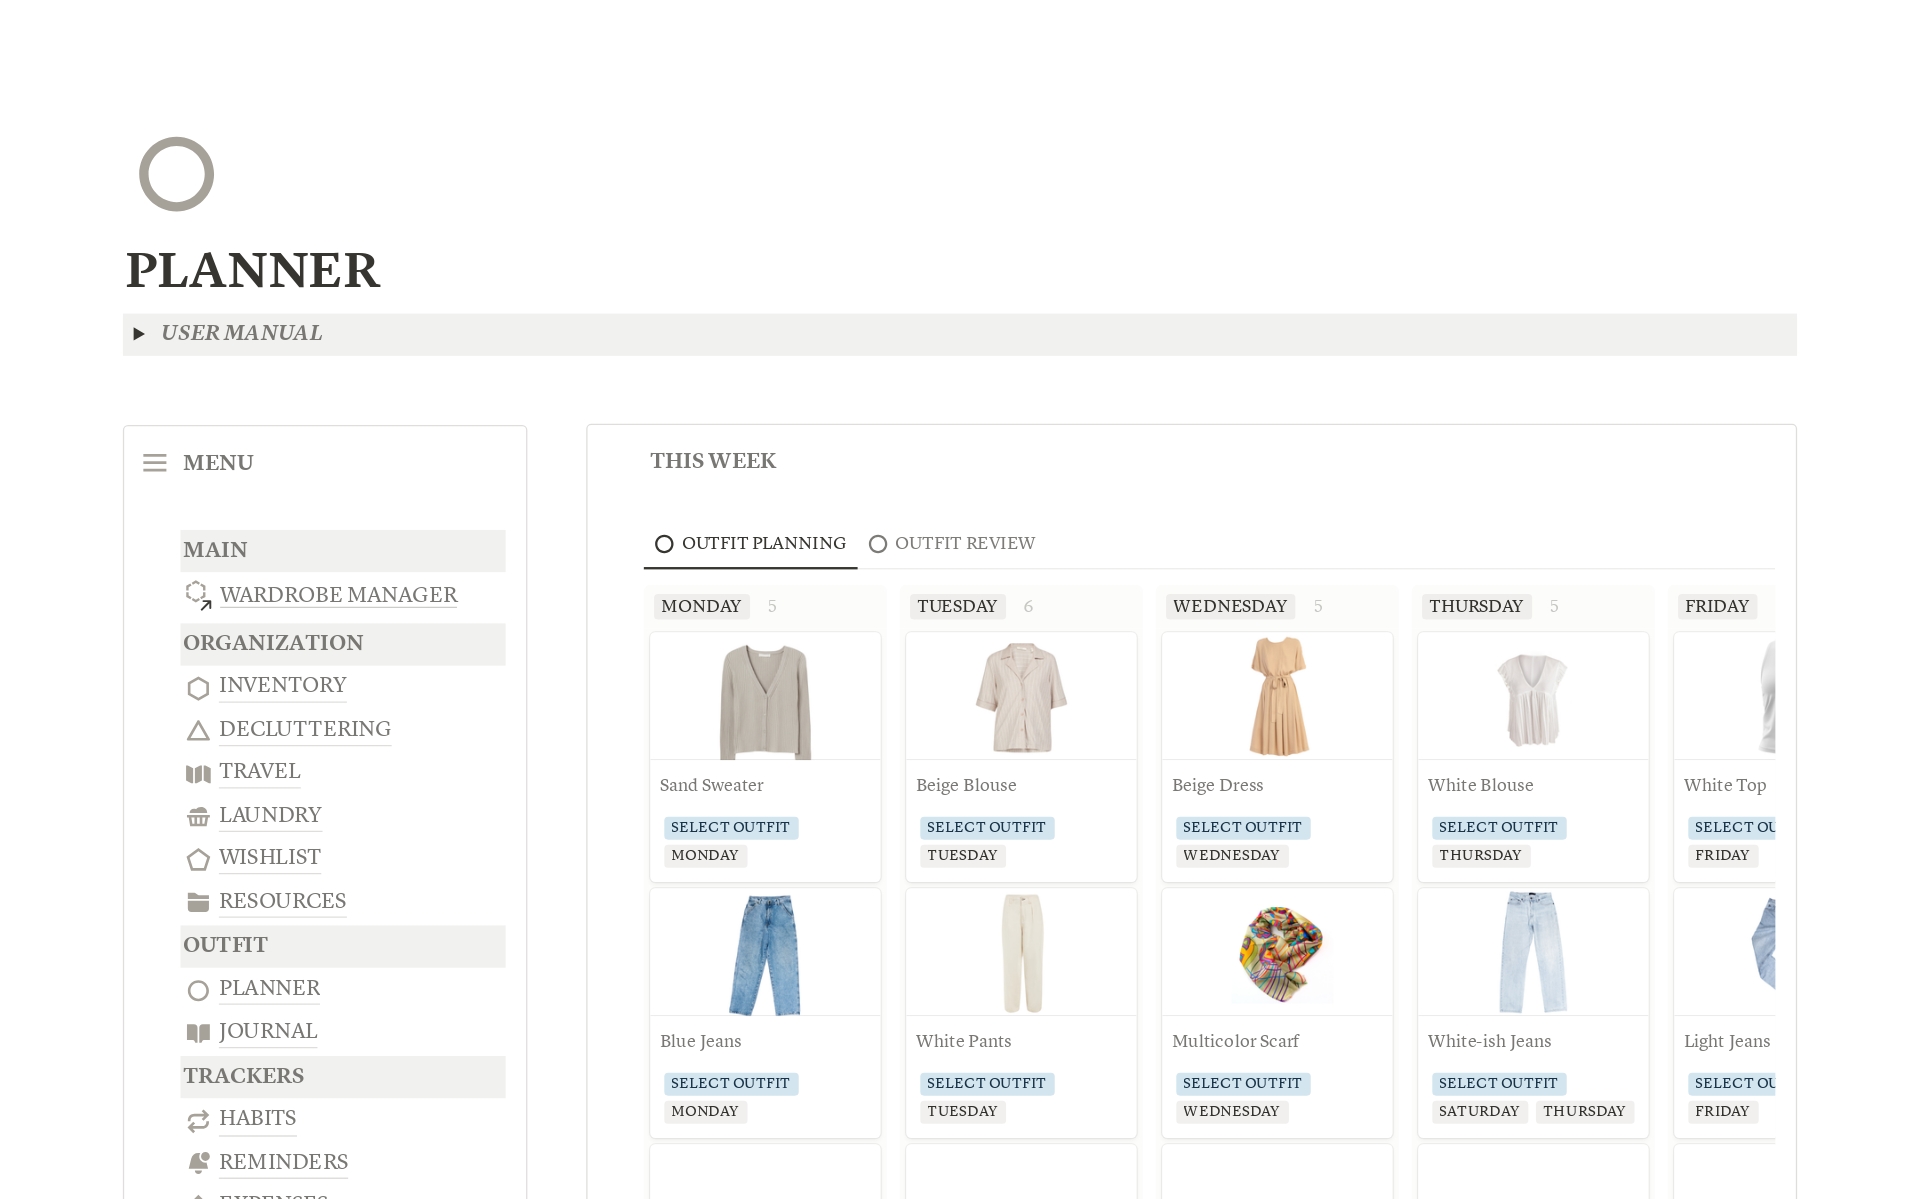 Streamline your wardrobe with our Wardrobe Manager. Easily categorize clothes, plan weekly outfits, and track style choices. Smart decluttering and spending tracking included. Manage laundry and travel outfits all in one place!